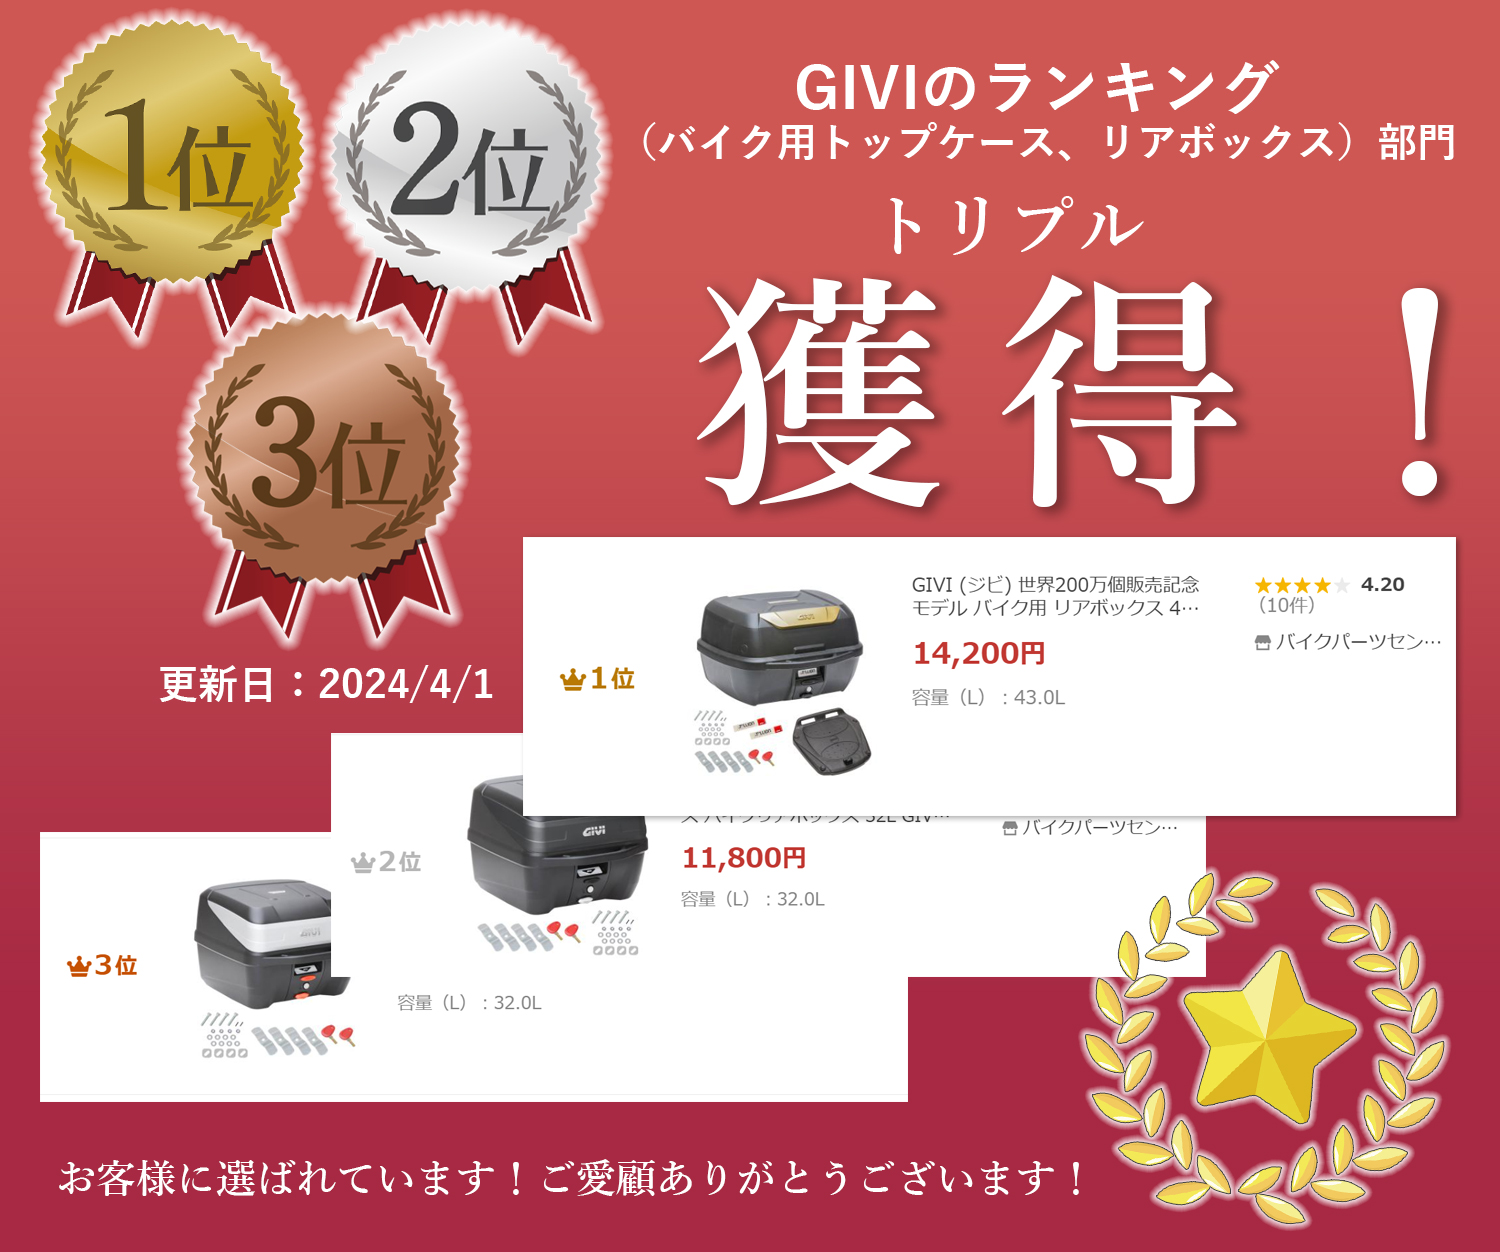 GIVI (jibi) world 200 ten thousand piece sale memory model for motorcycle rear box 43L key attaching not yet painting black satin Gold panel (2M) mono-lock case B43 for motorcycle box 